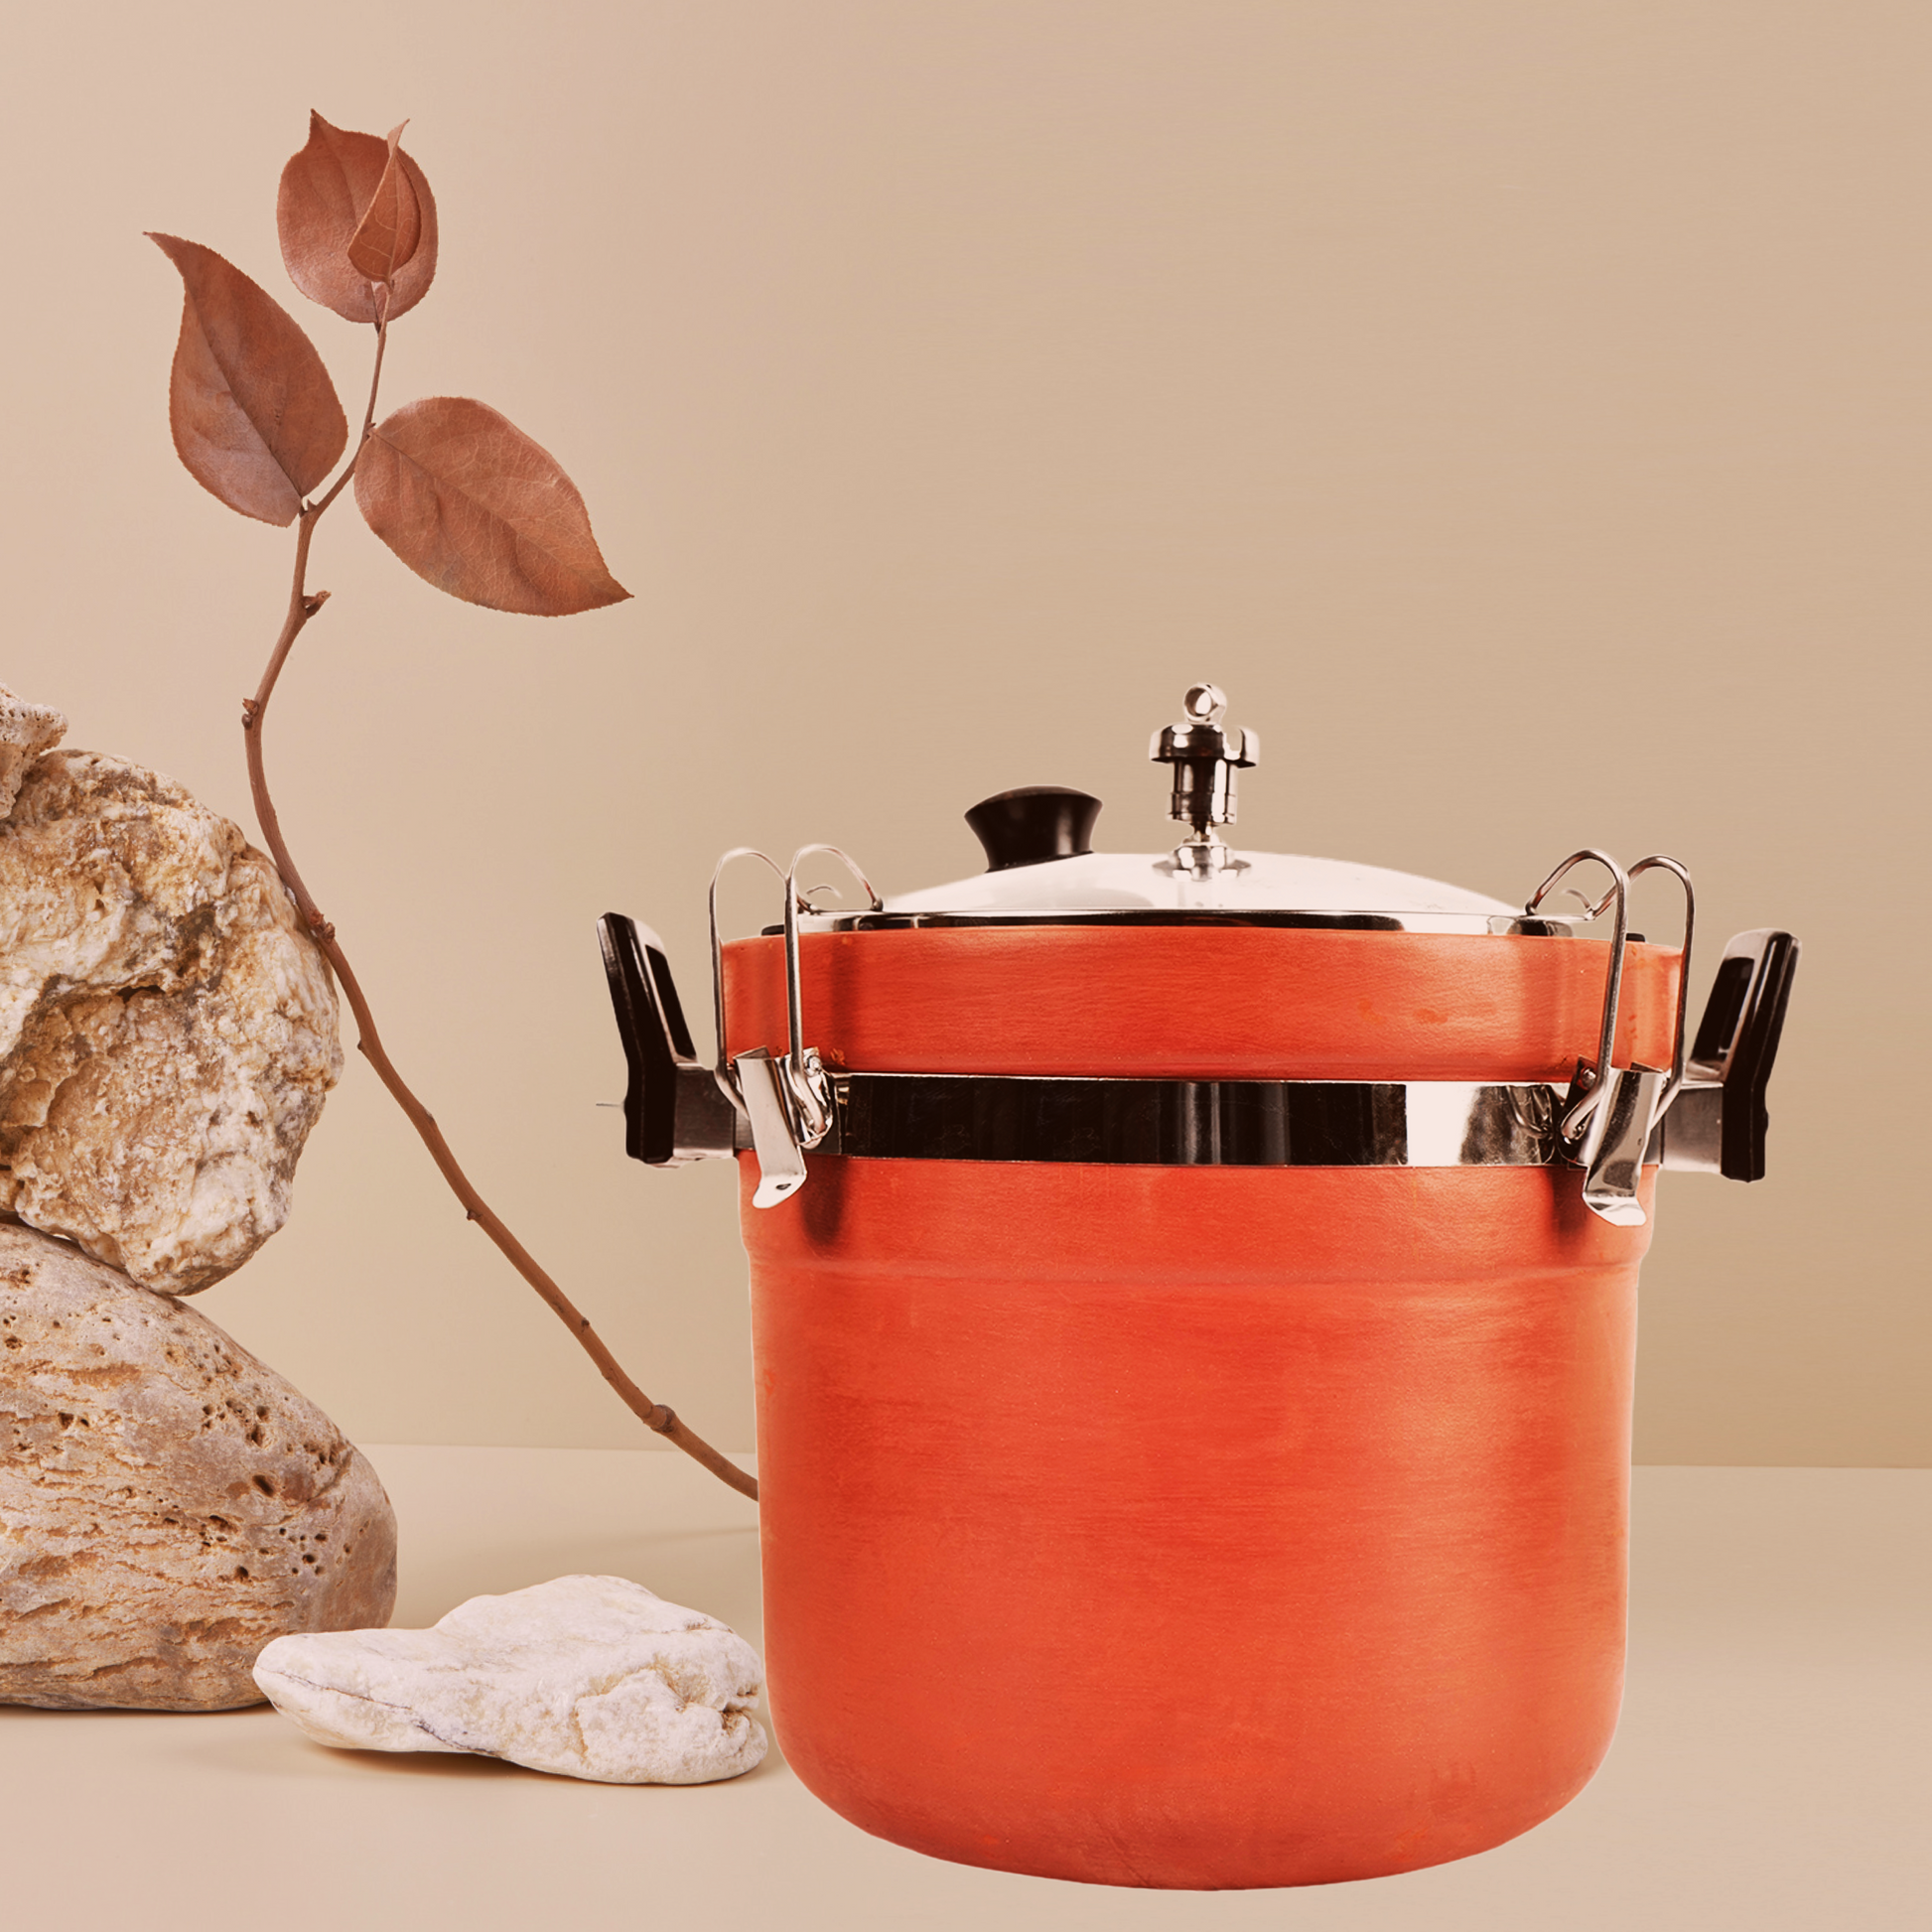 Clay Pressure Cooker in Itarsi at best price by Ecomy3 Enterprises